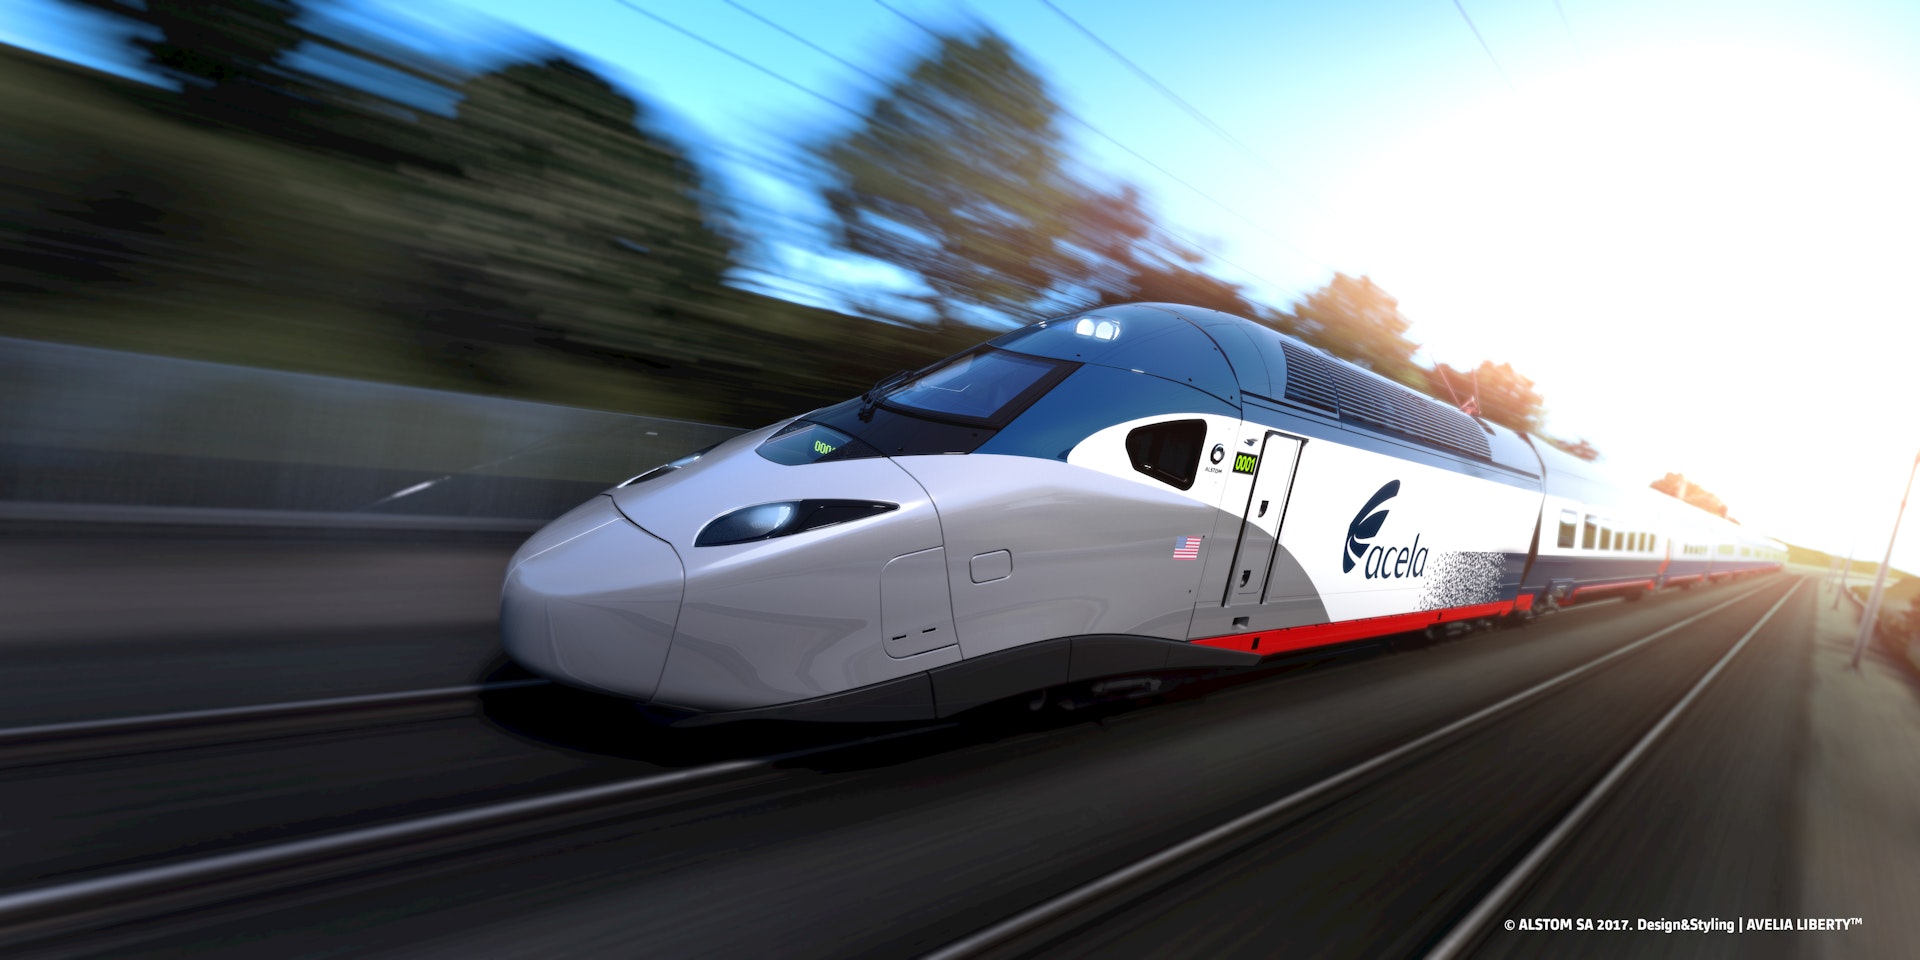 Closeup of Amtrak's Acela high-speed train on the track 